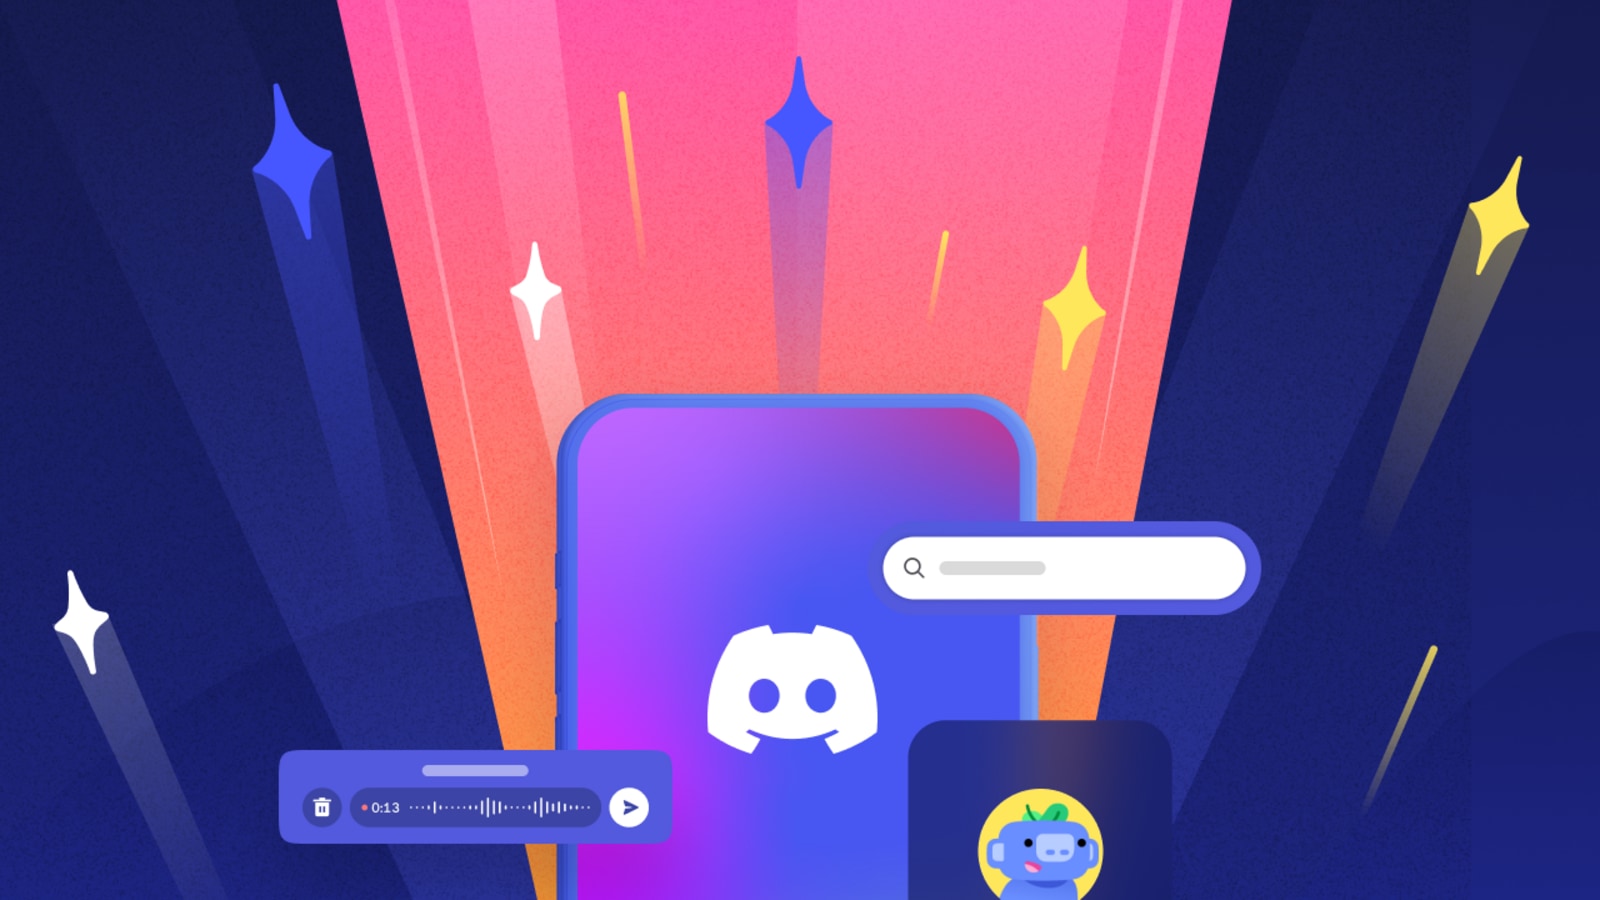 Discord launches AI-focused features for collaboration